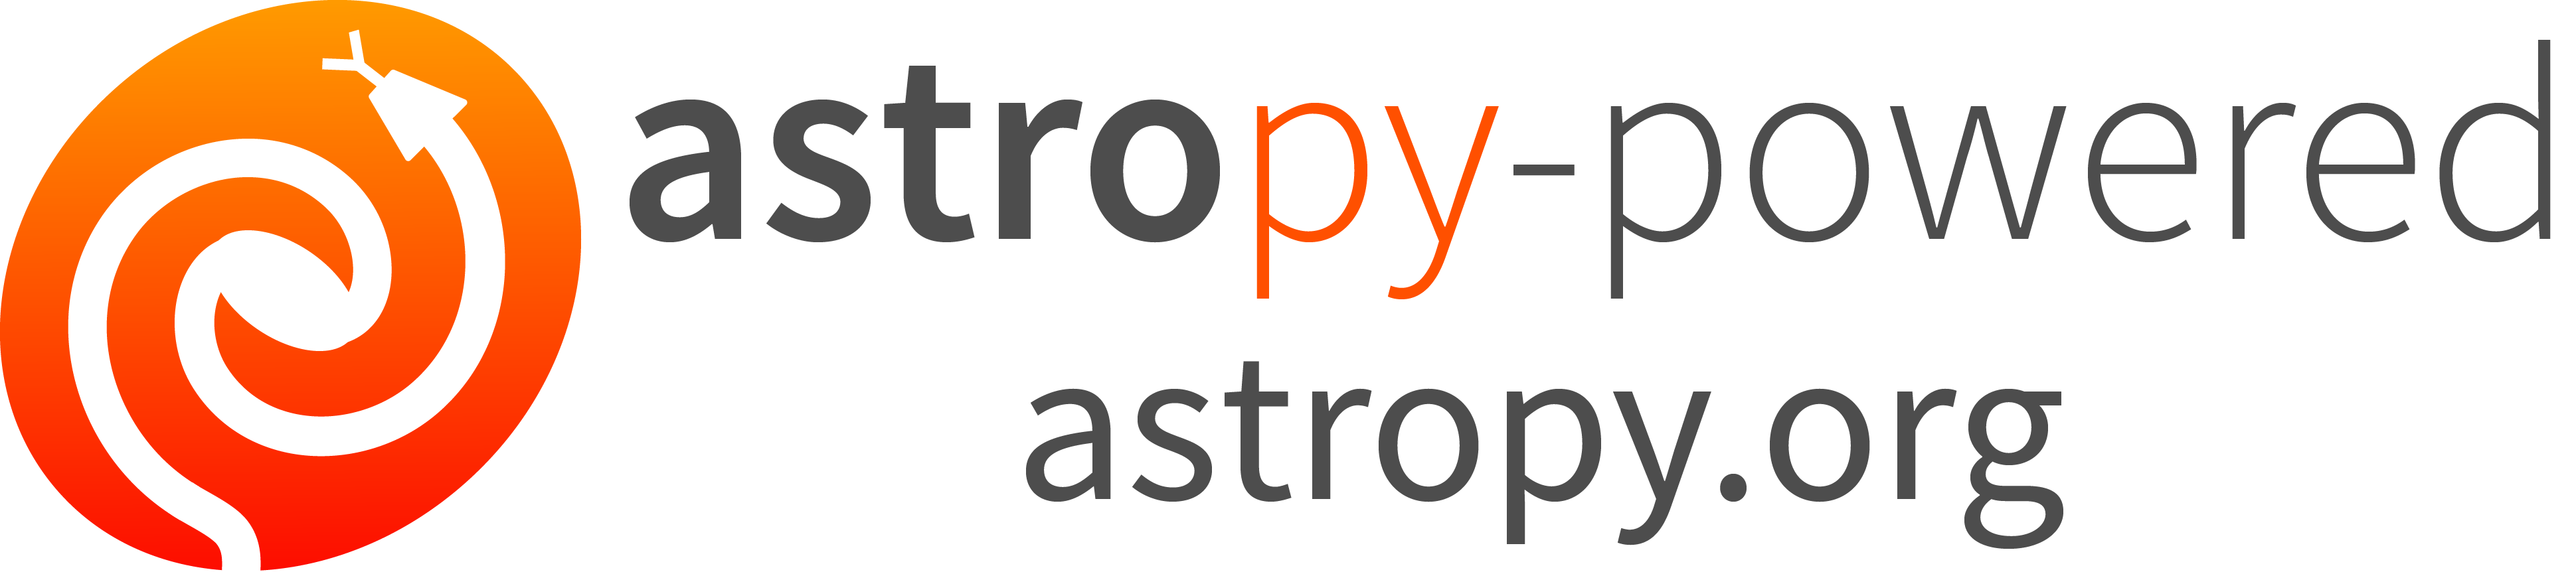 Powered by Astropy